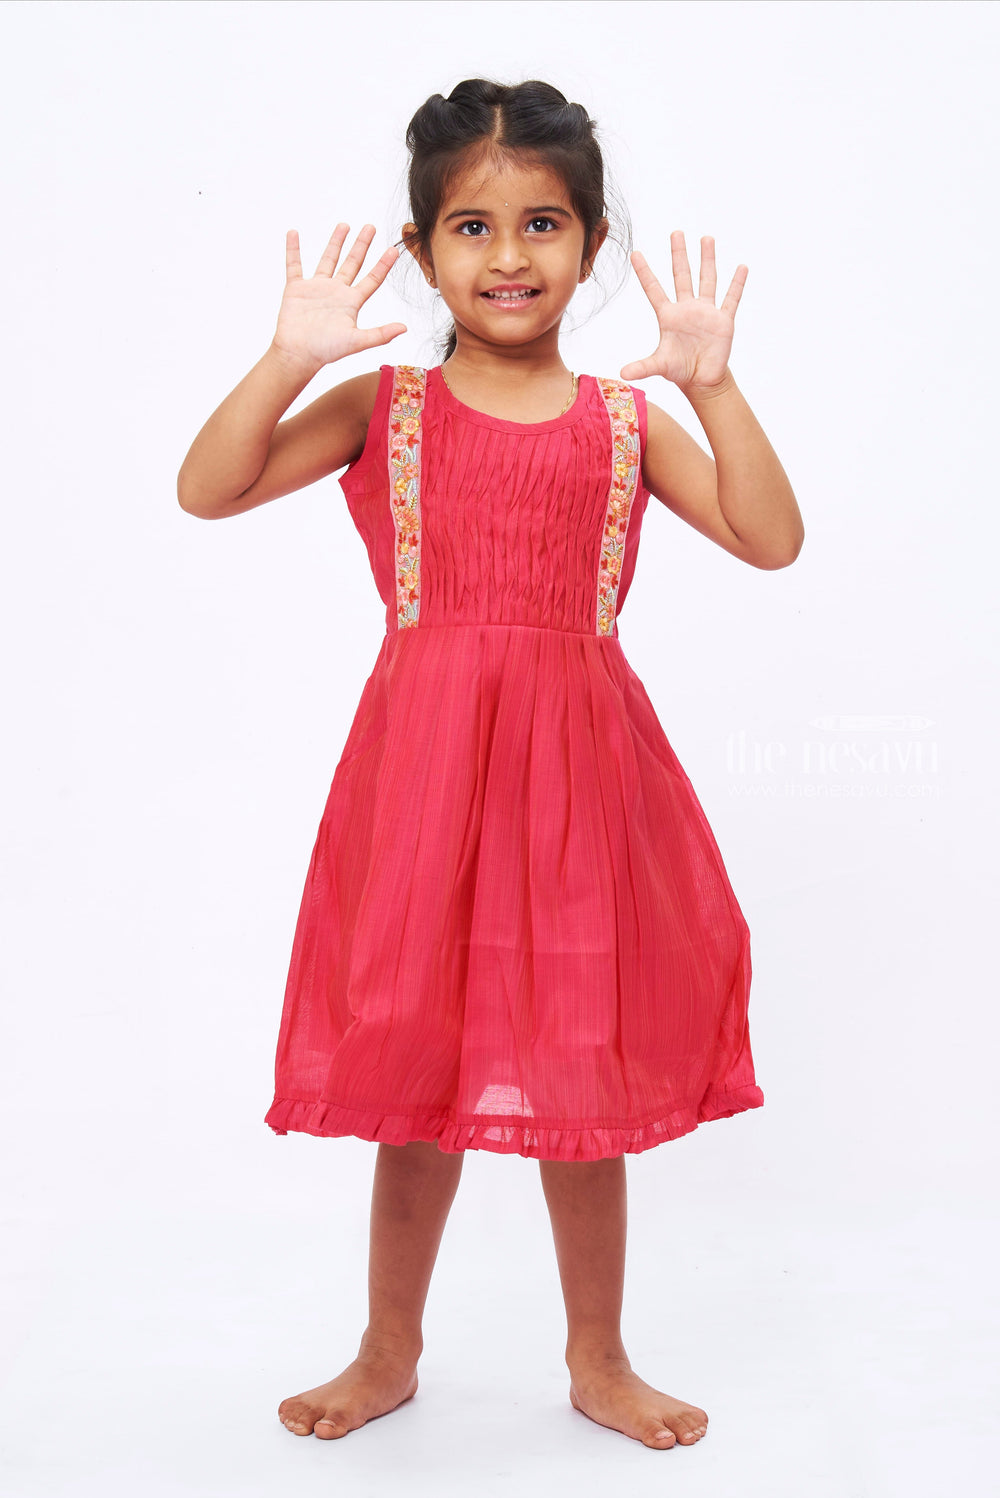 The Nesavu Girls Cotton Frock Pink Blossom Girls Cotton Frock: Floral Embroidery & Pleated Design Nesavu Pink Floral Cotton Frock for Girls | Summer Comfort Daily Wear | The Nesavu